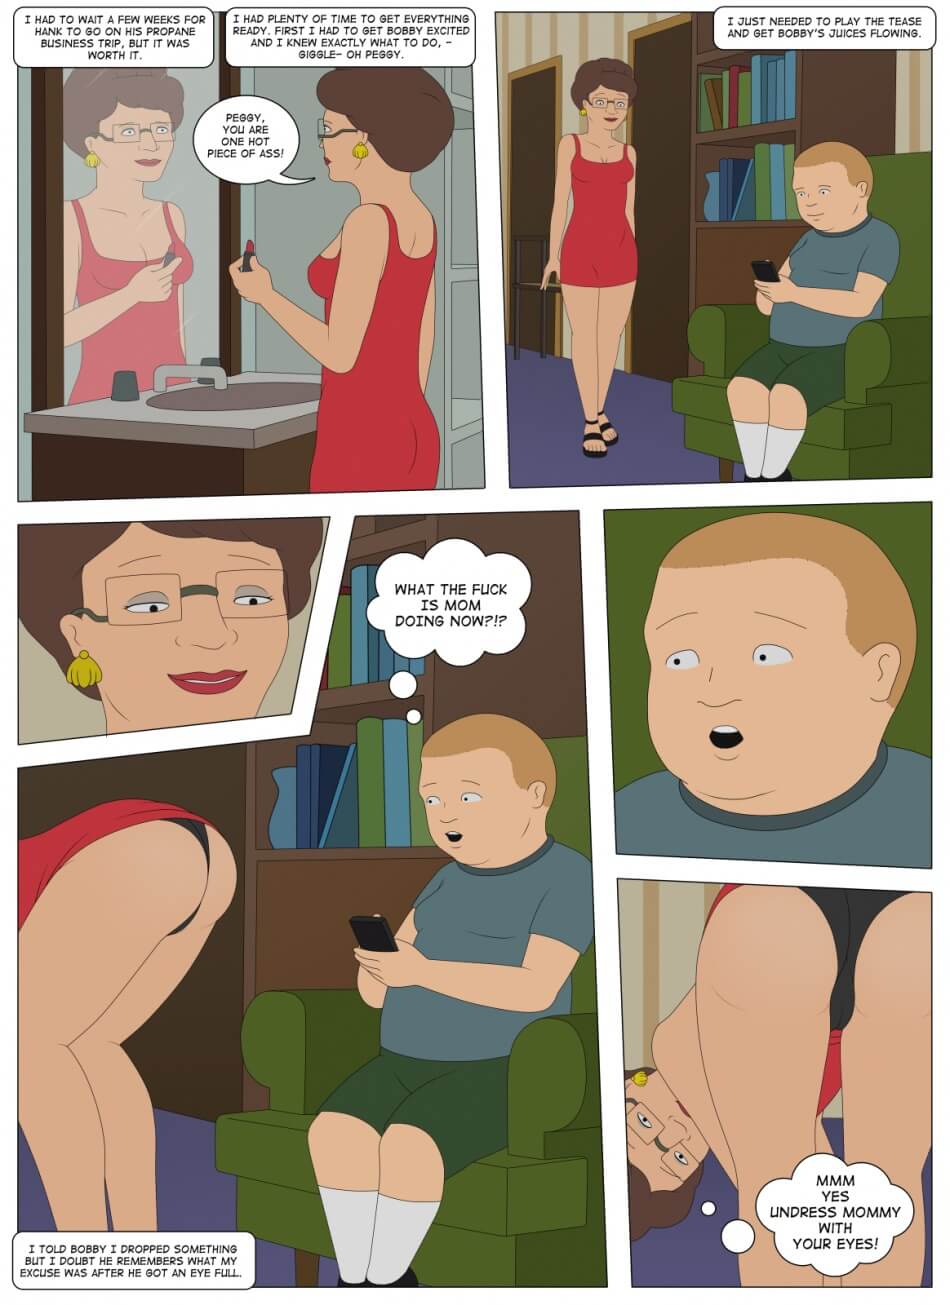 King of the hill porno